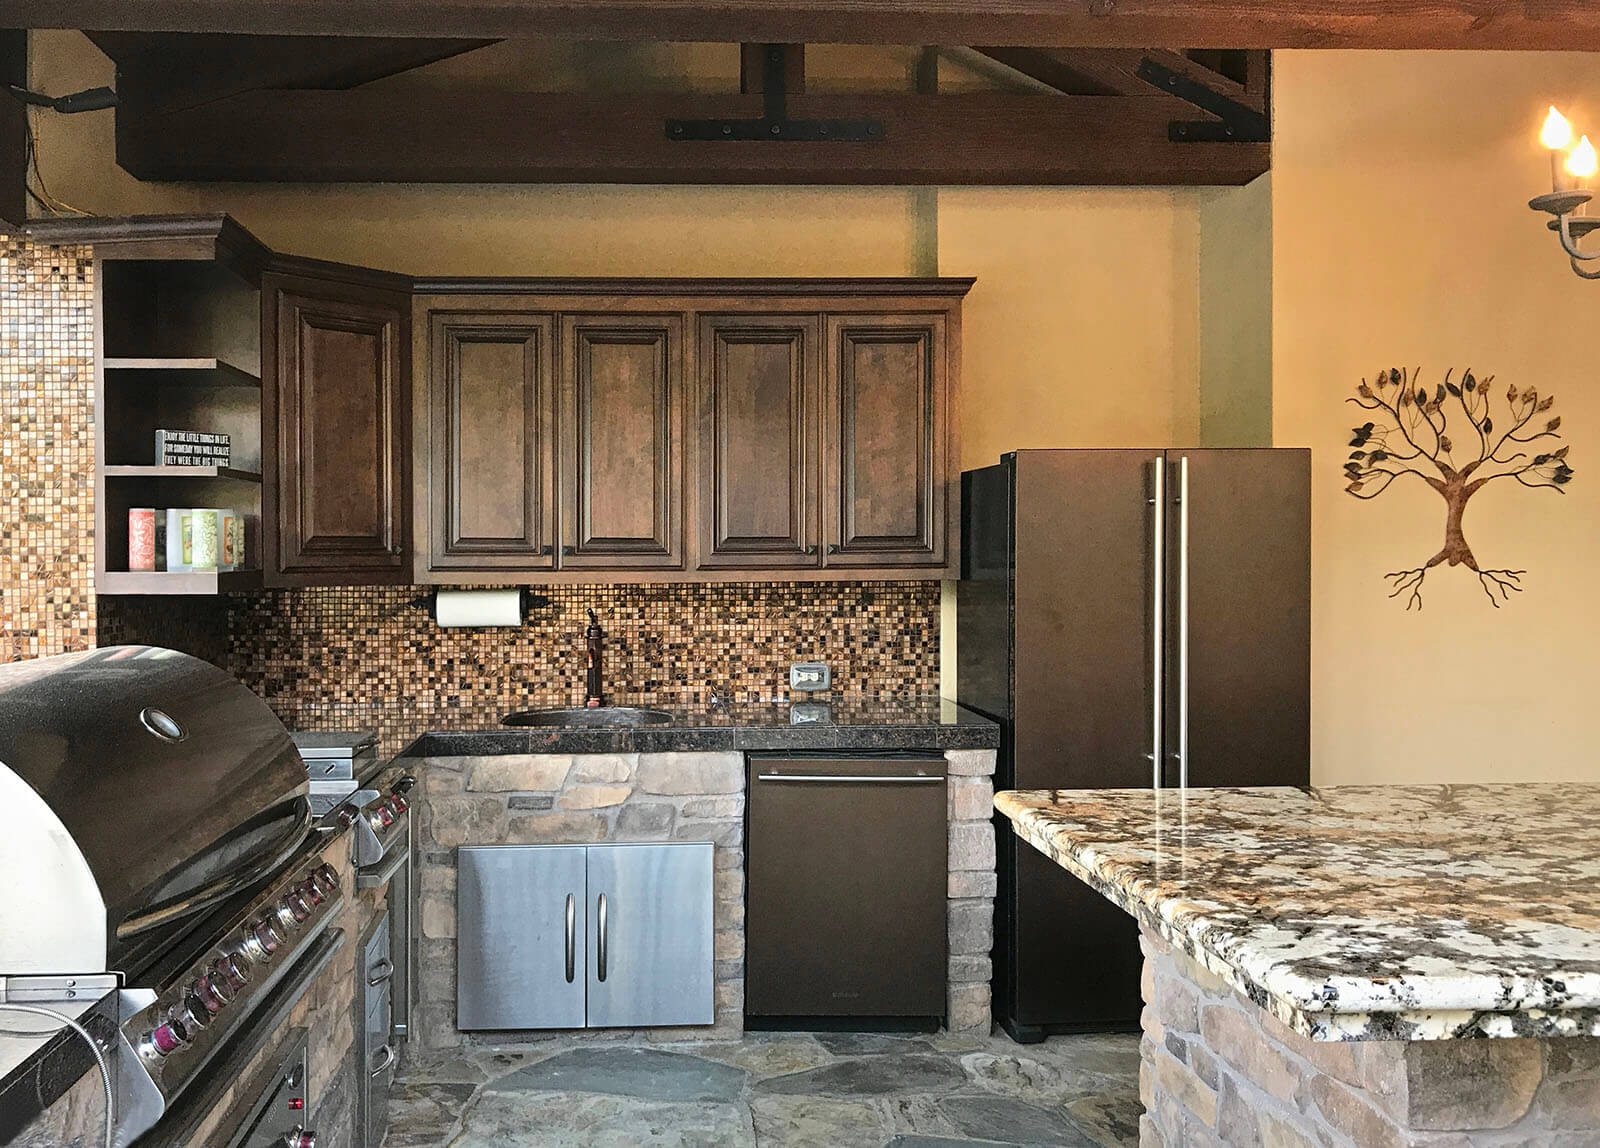 Colorful marble kitchen island with indoor grilling area, wooden cabinets and mosaic backsplash